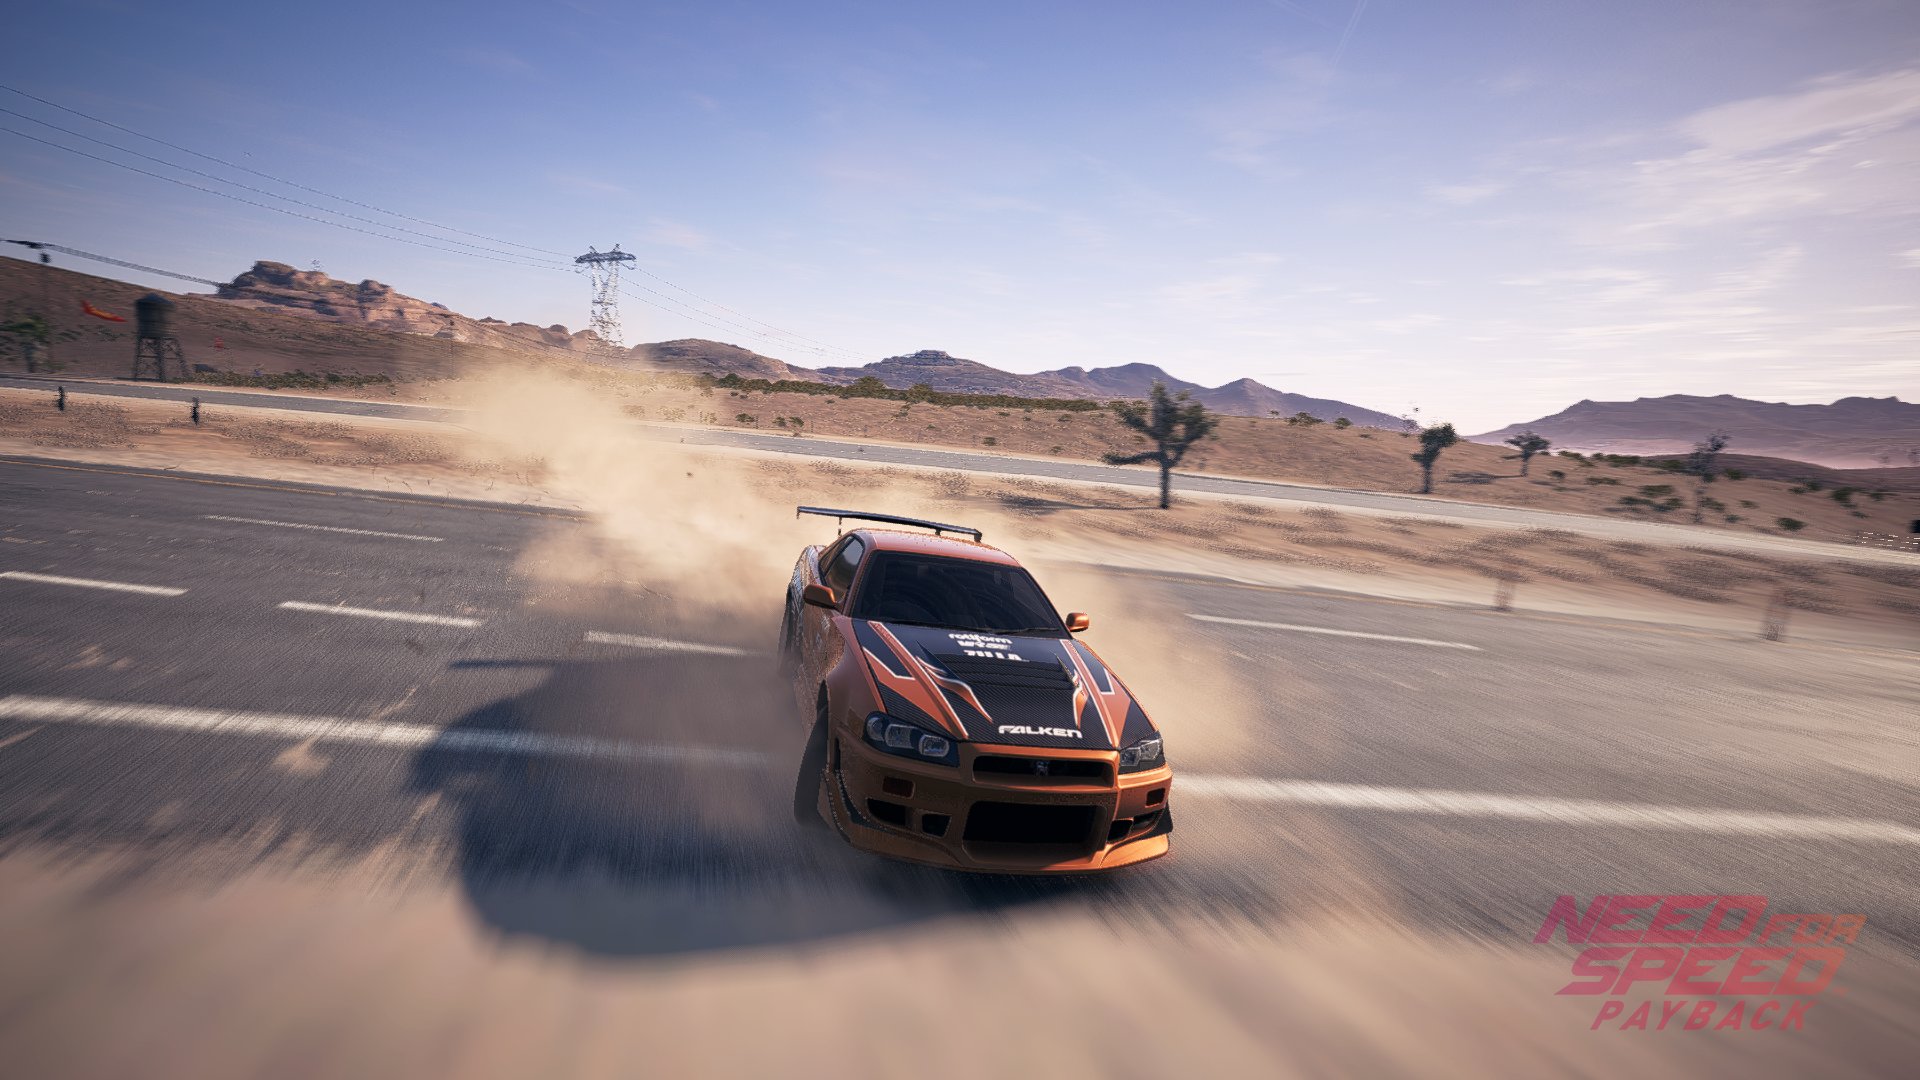 2 player on need for speed payback